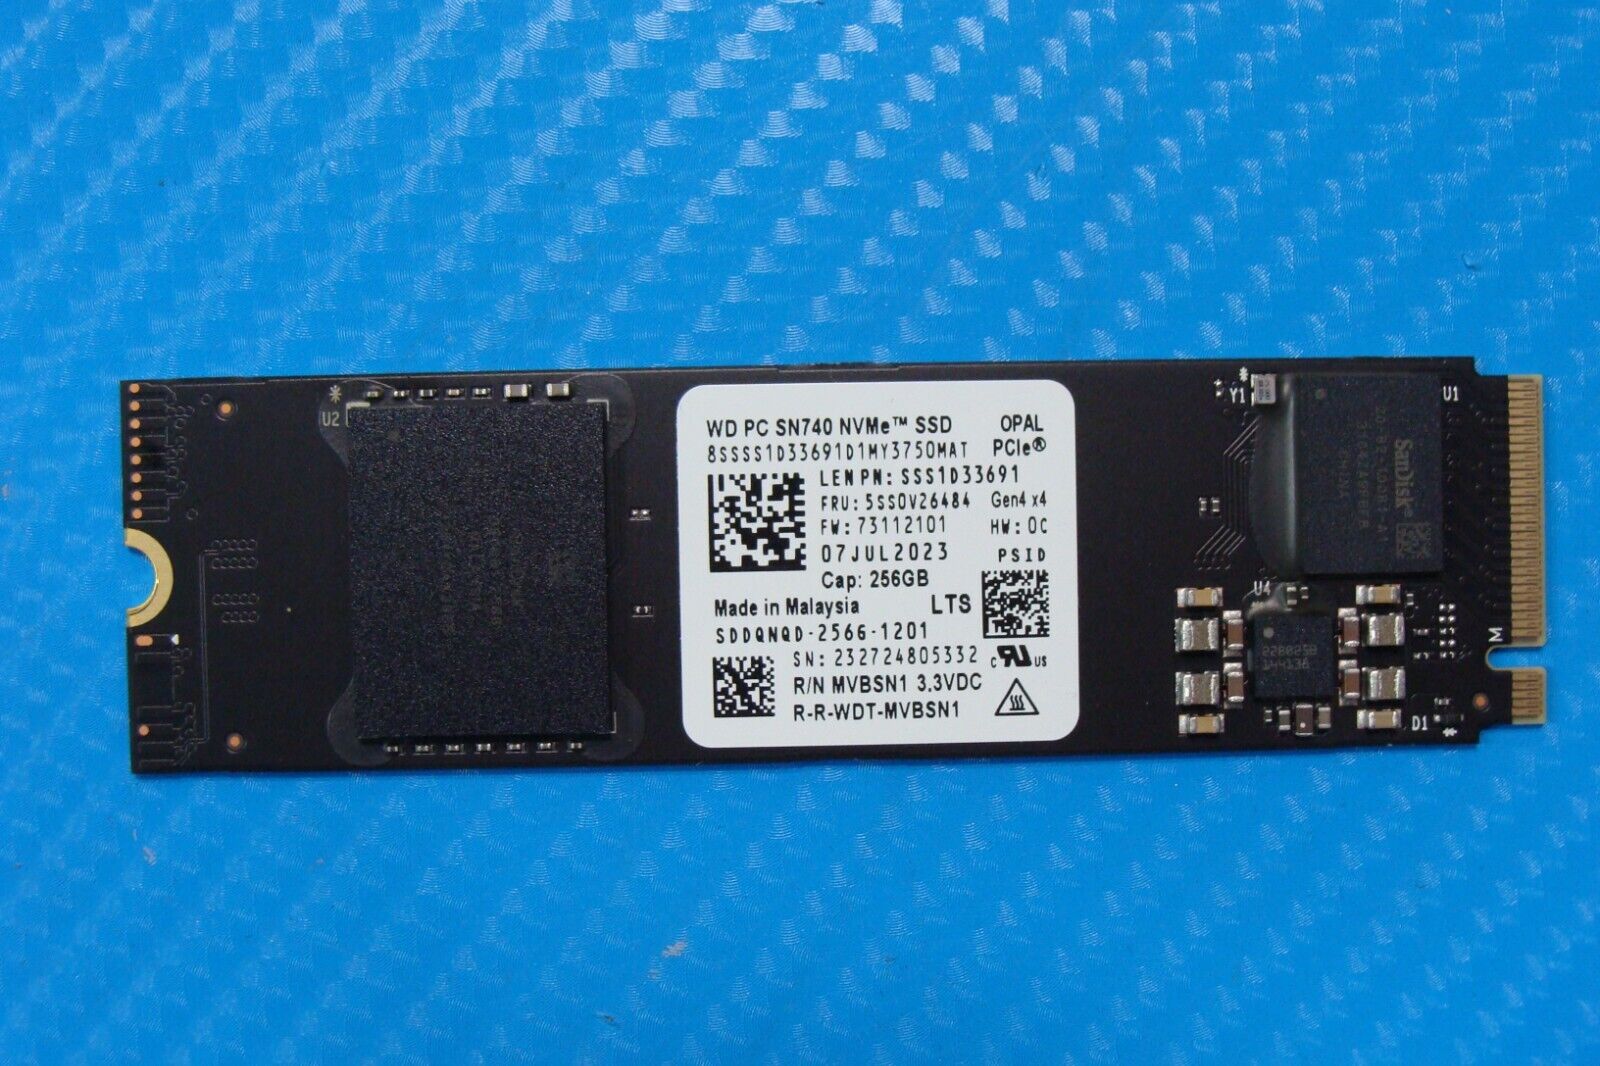 Lenovo T14 Gen 2 WD M.2 NVMe 256GB SSD Solid State Drive SDDQNQD-256G-1201